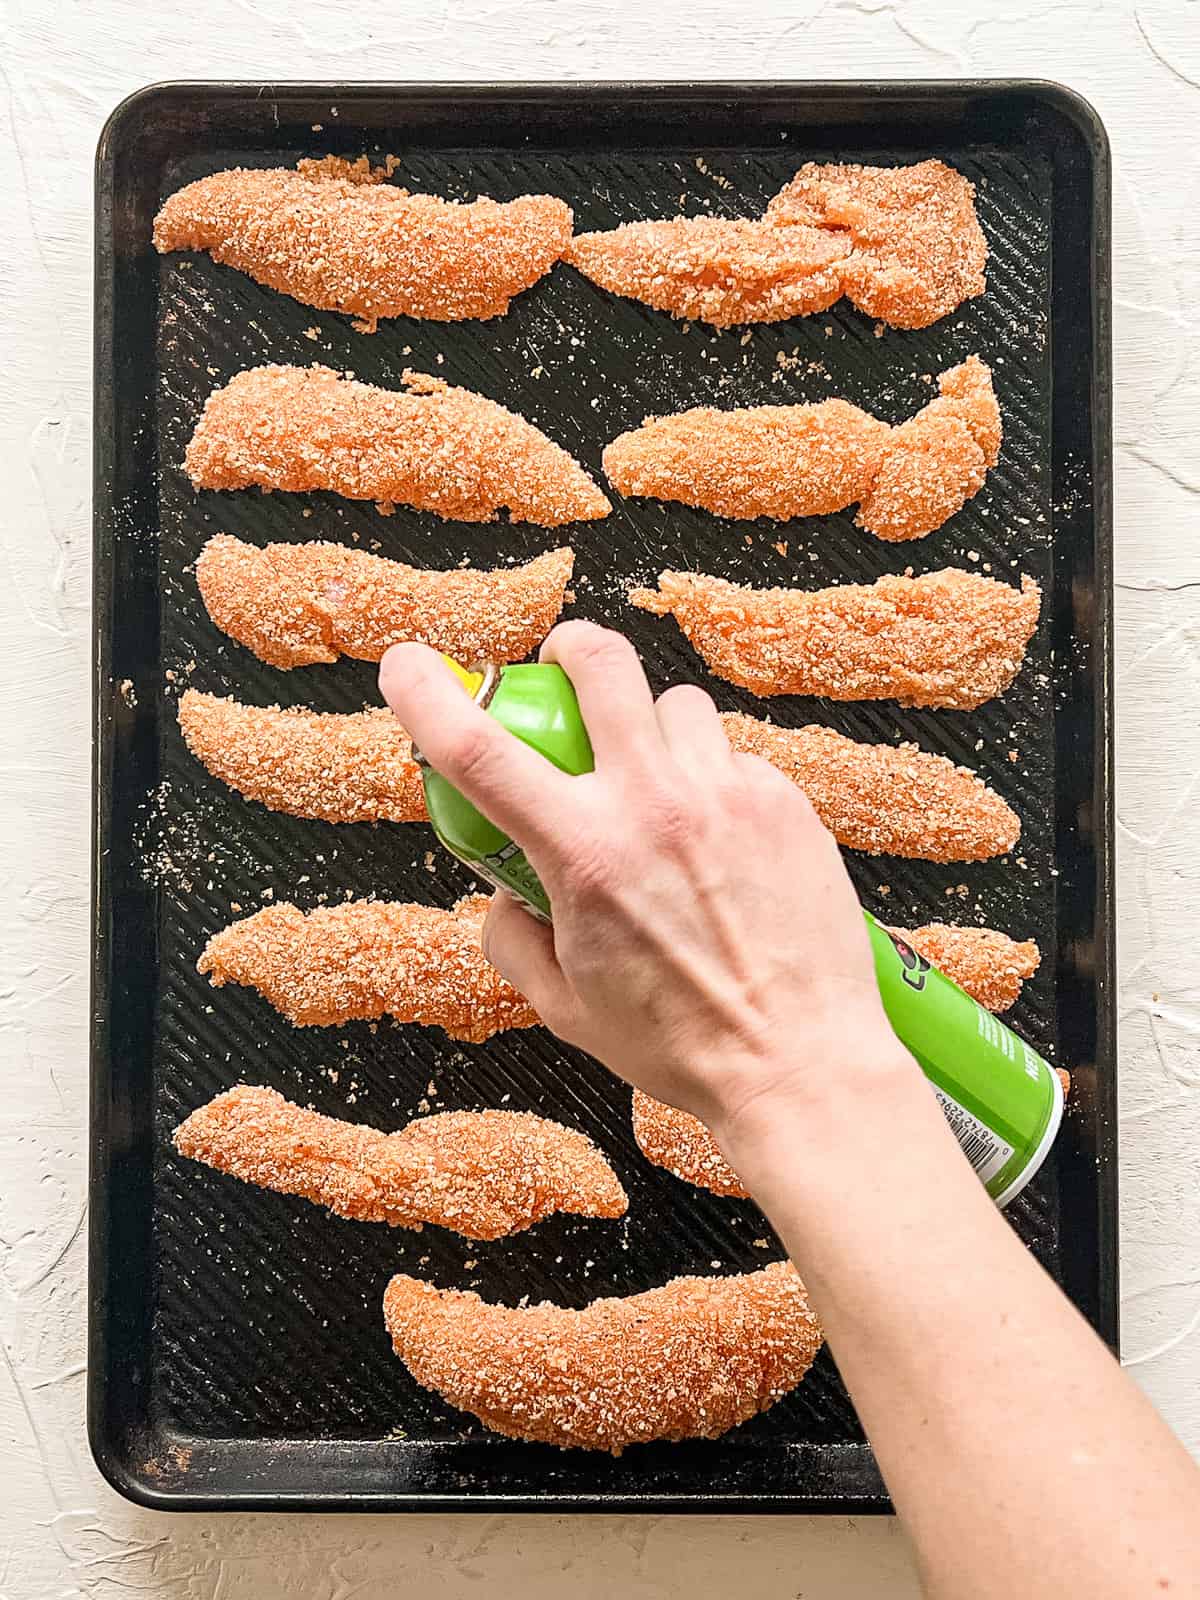 Spraying breaded chicken tenders with cooking spray.